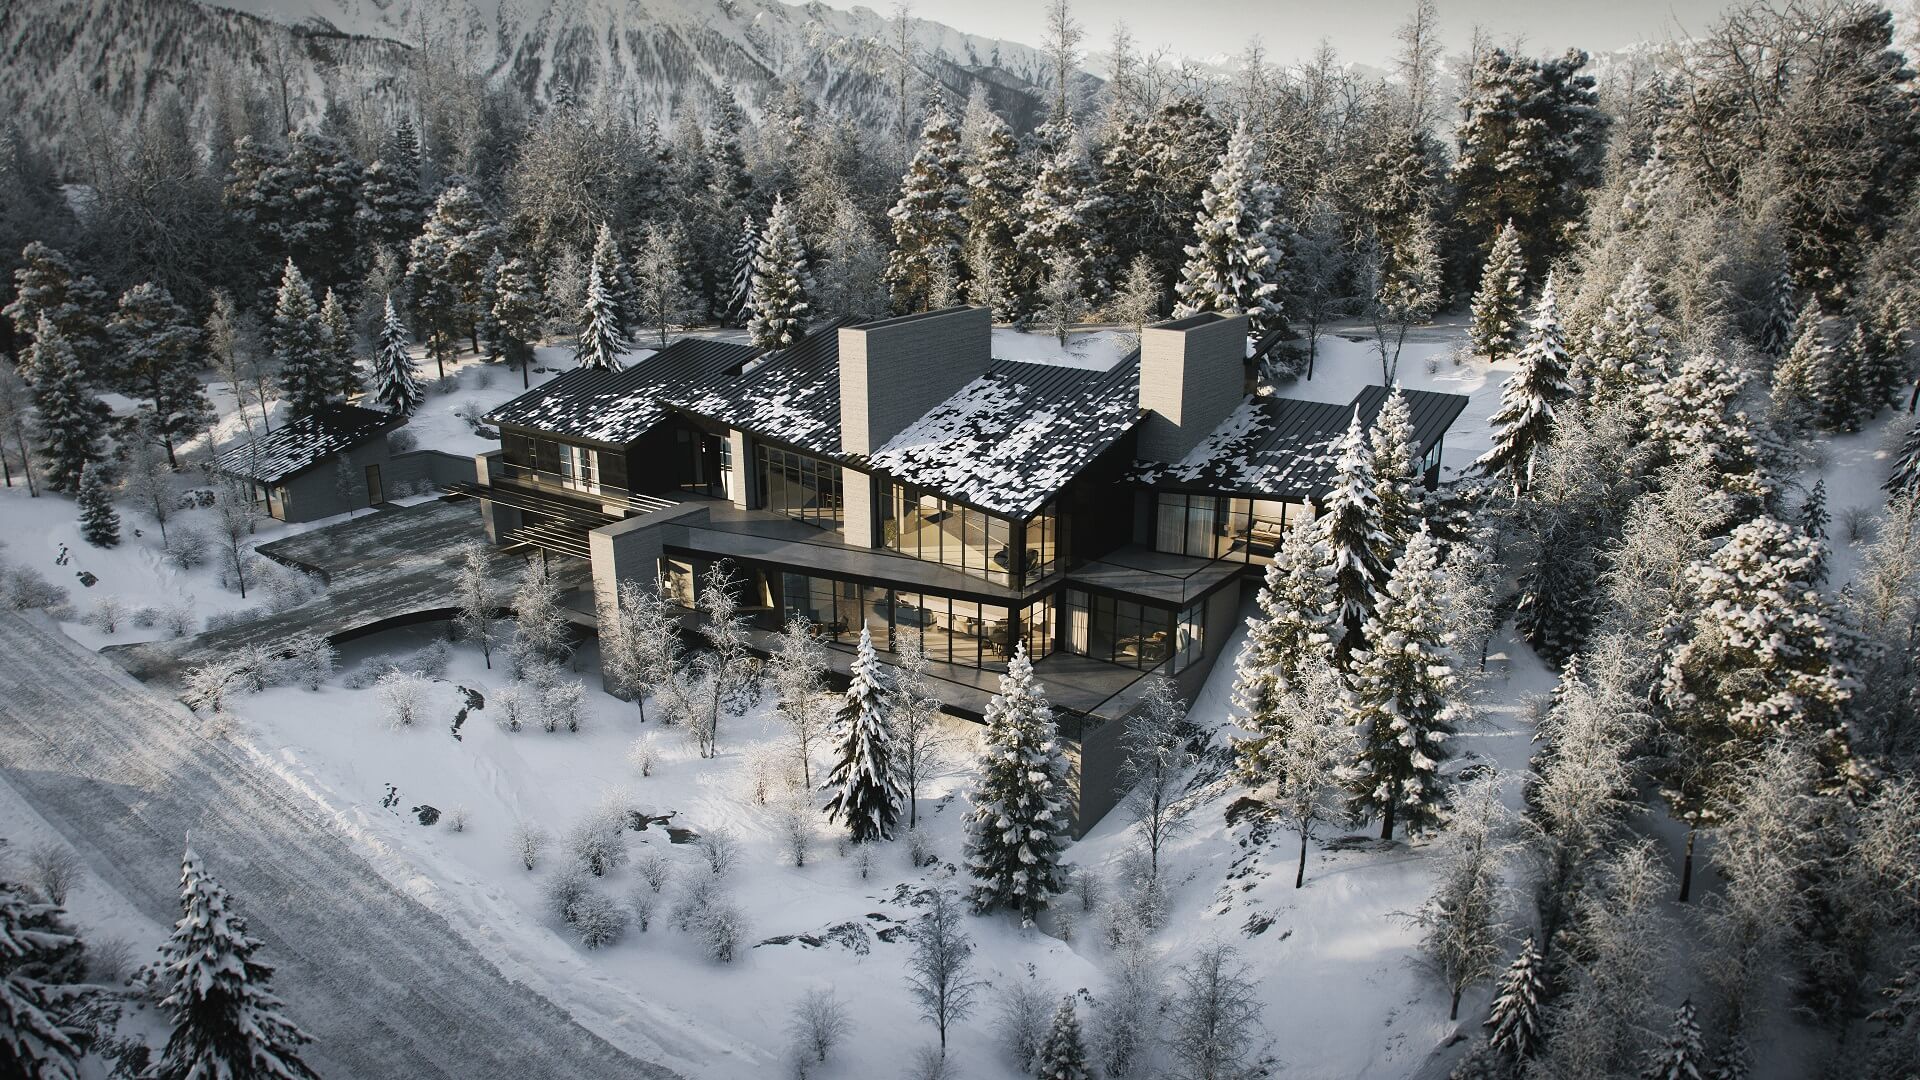 Intermediate Results of the Winter Residence 3D Visualization